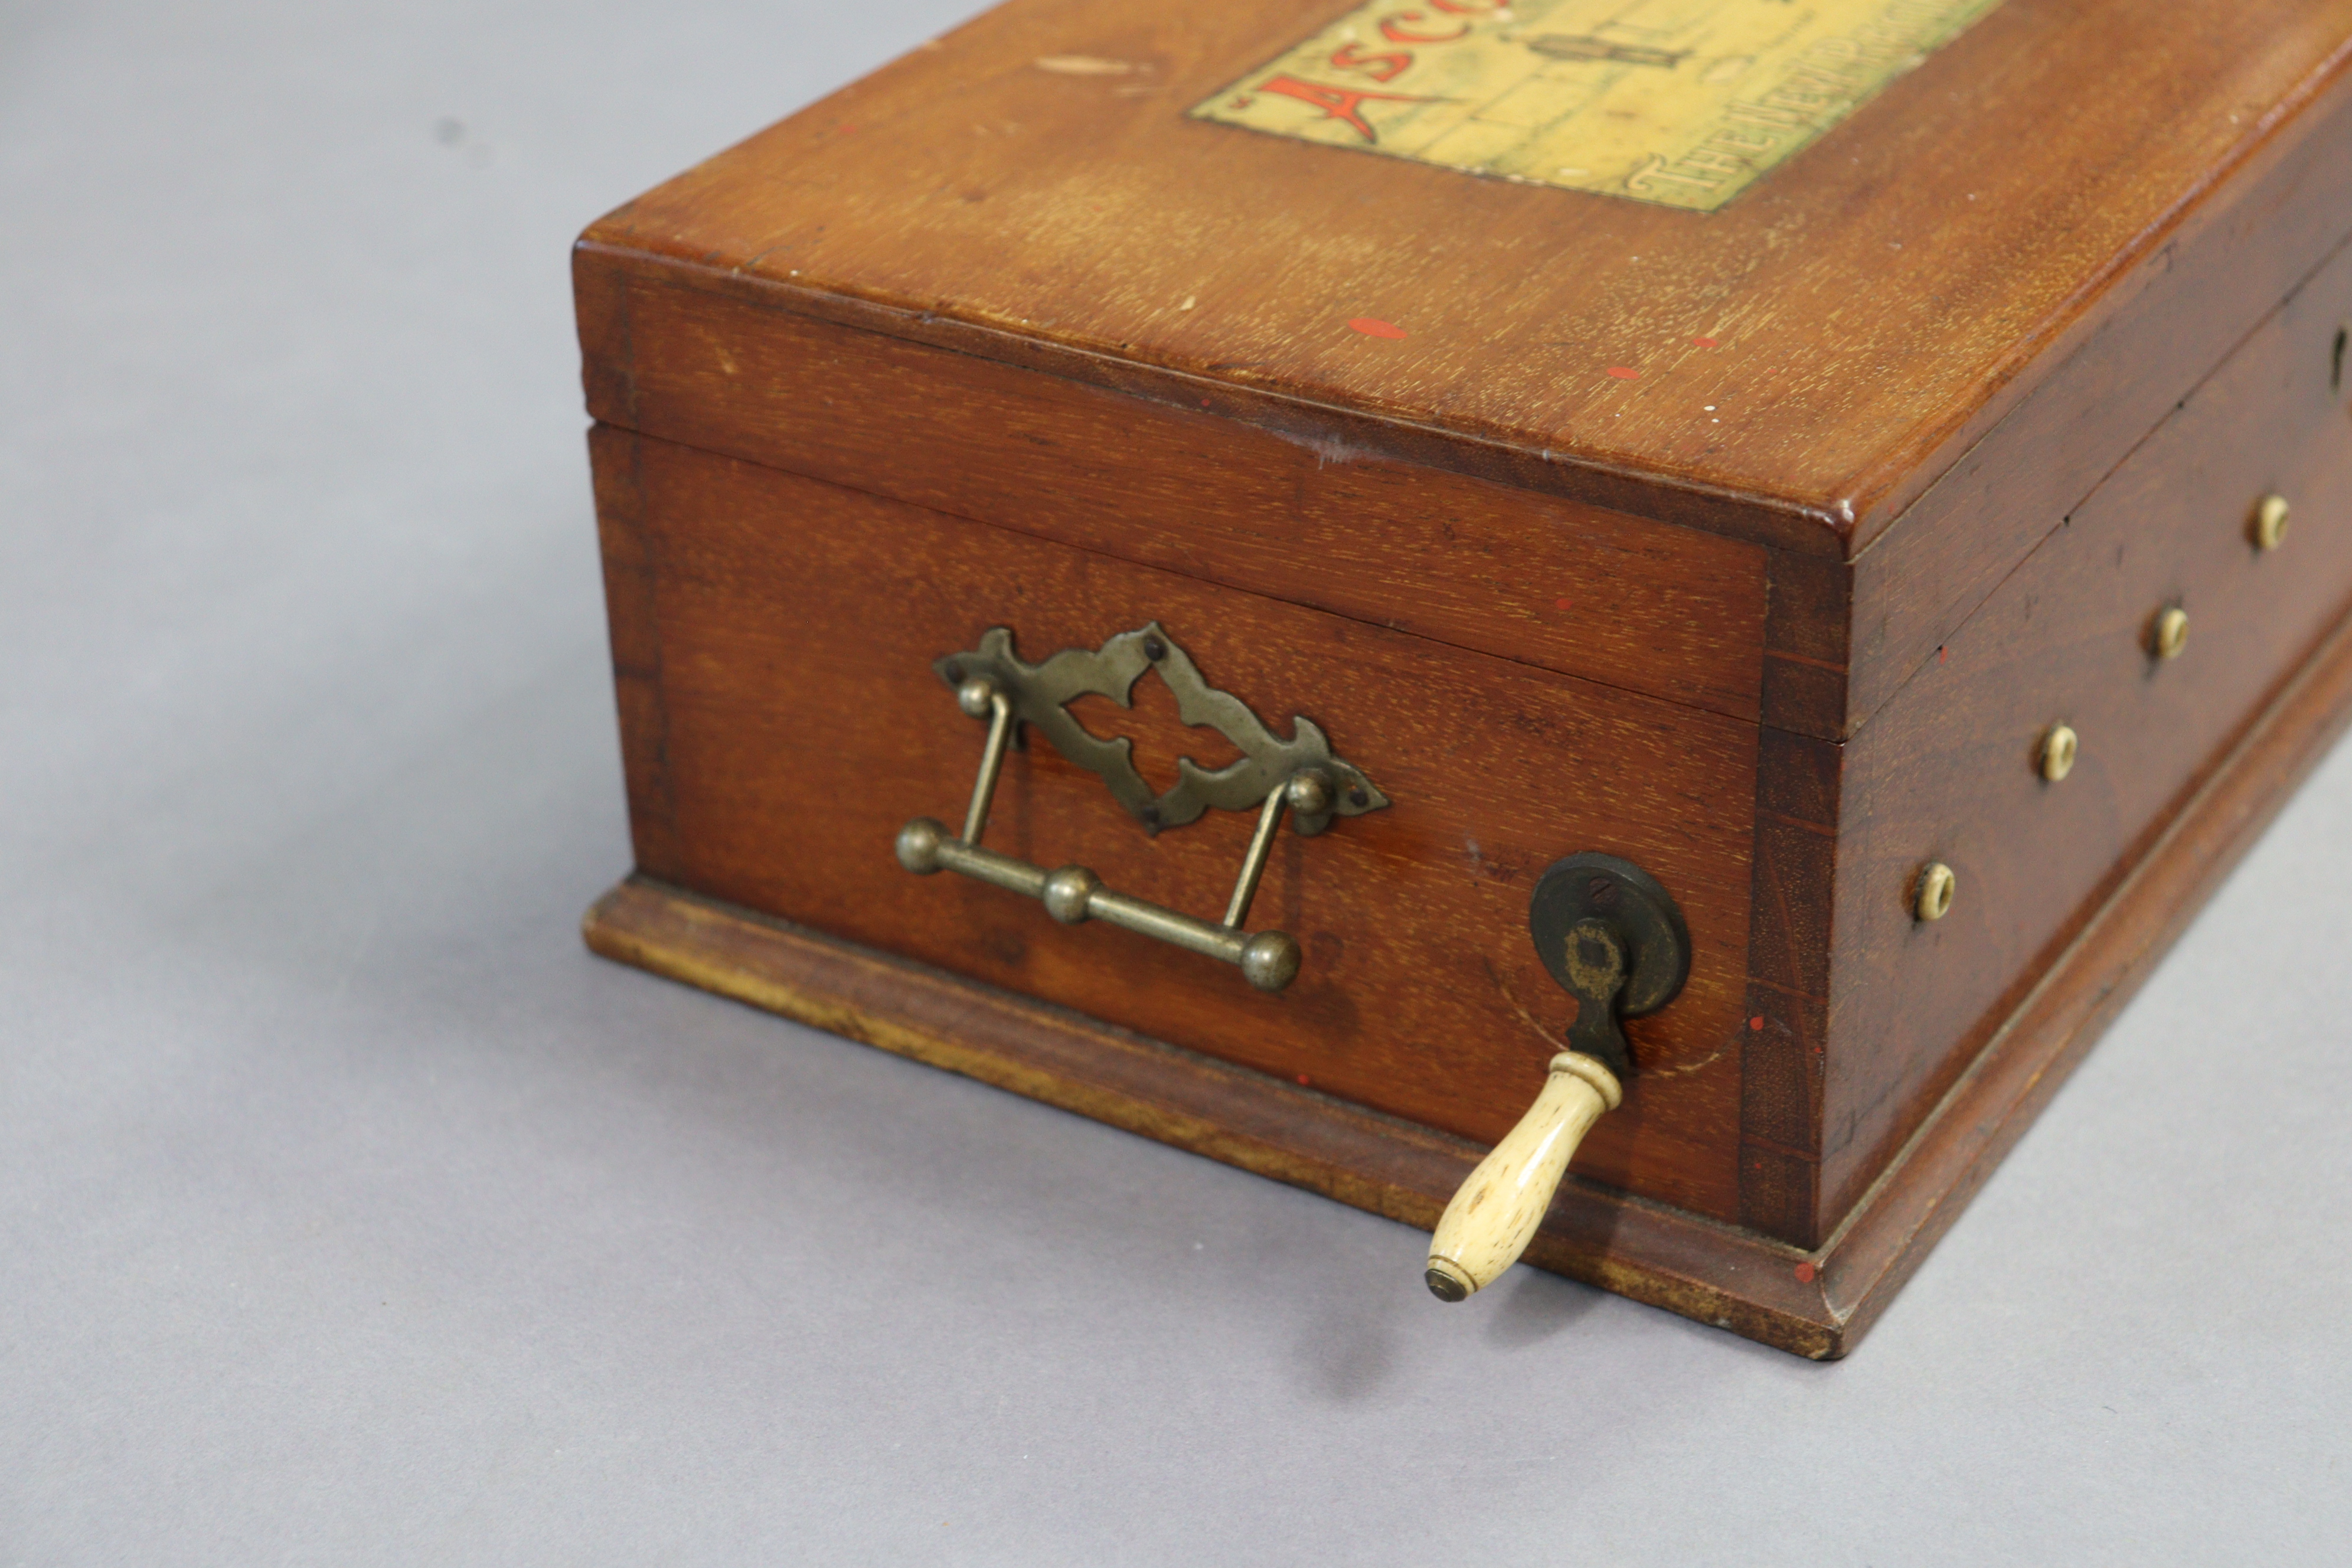 An antique “Ascot” The New Racing Game by Jaques & Son of London, in a fitted mahogany case, 34cm - Image 6 of 7